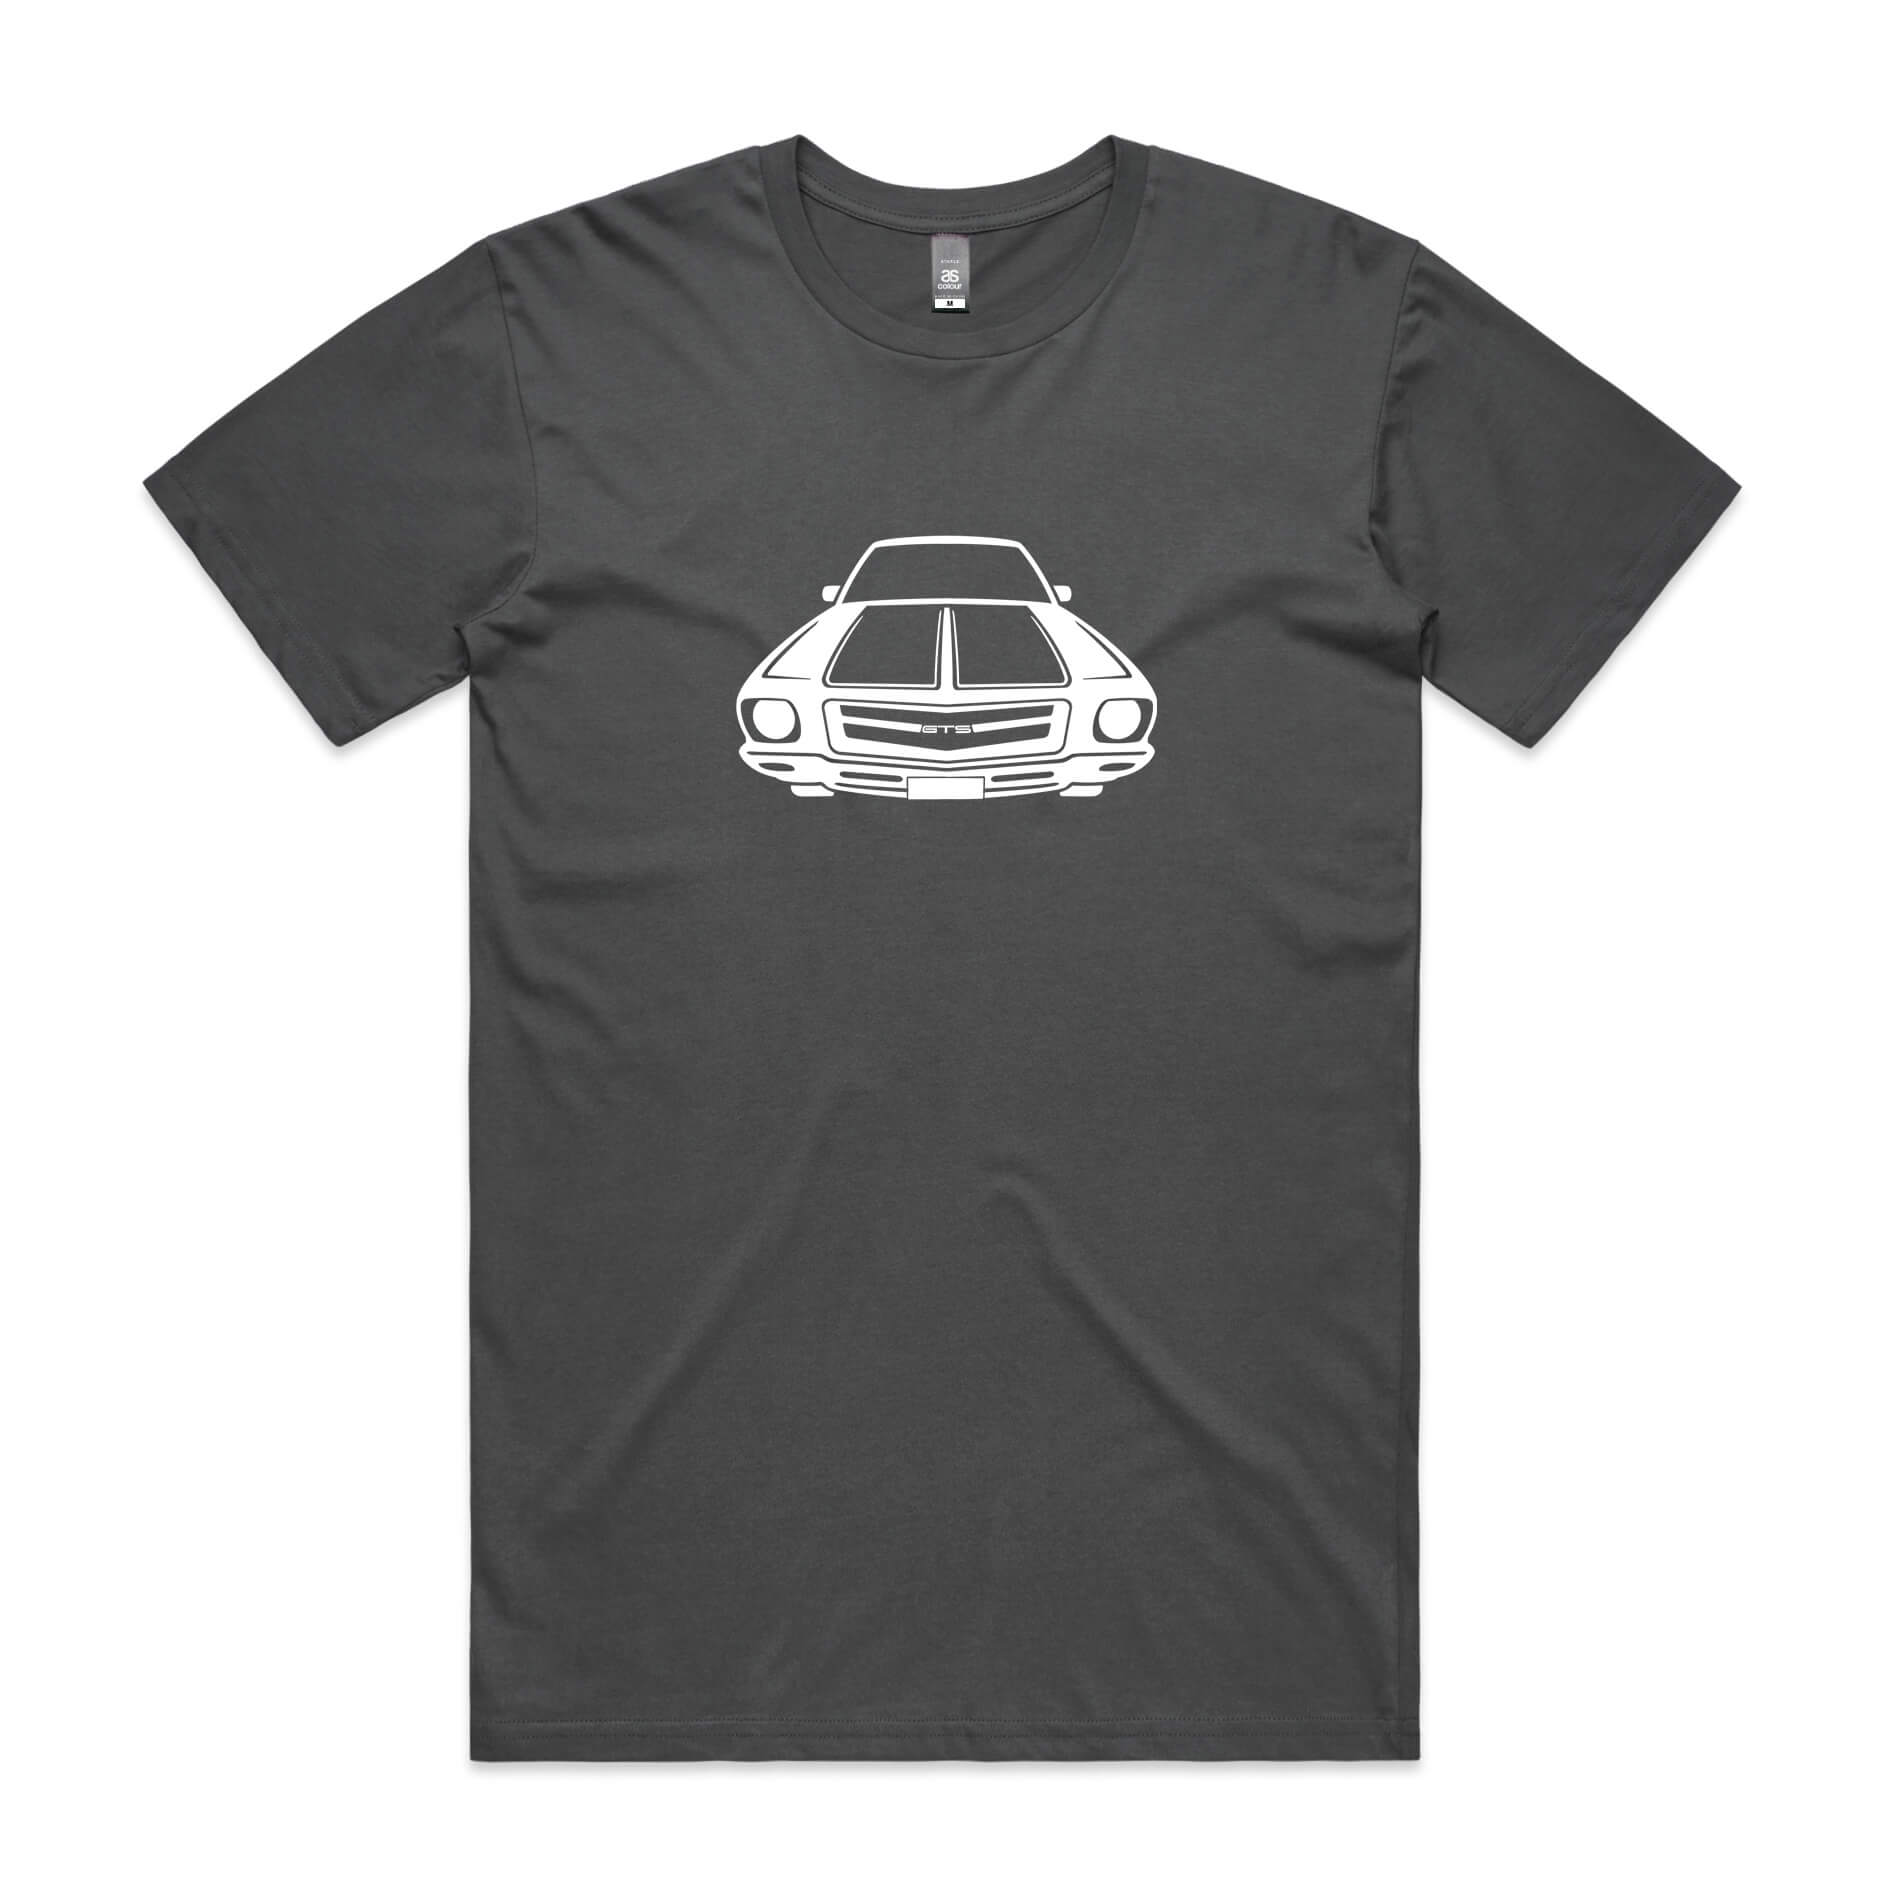 Holden HQ Monaro t-shirt in charcoal grey